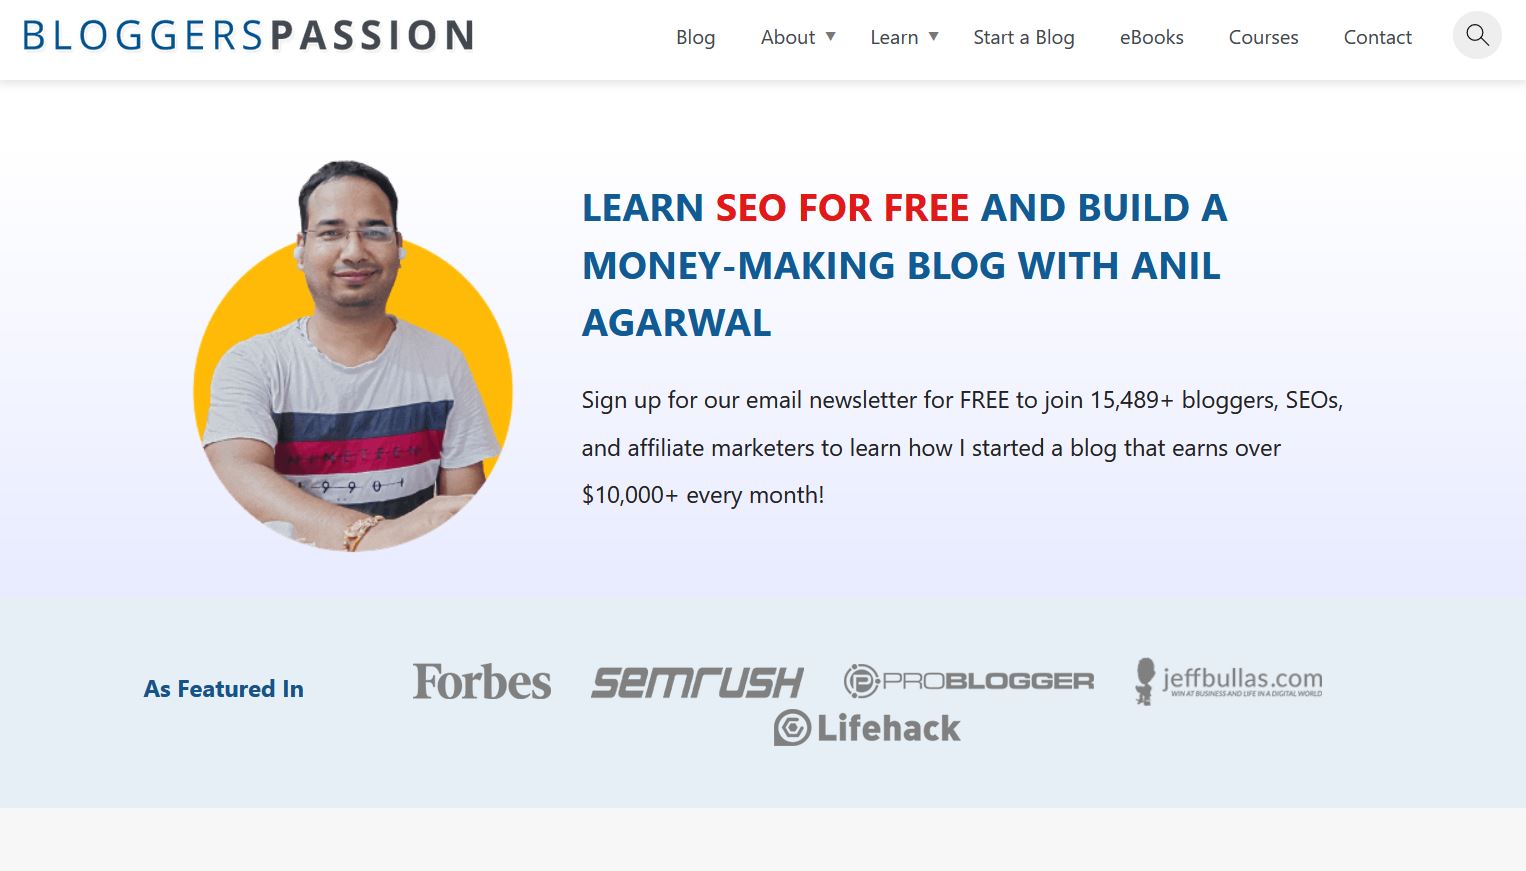 website technology tools used to build bloggerspassion blog